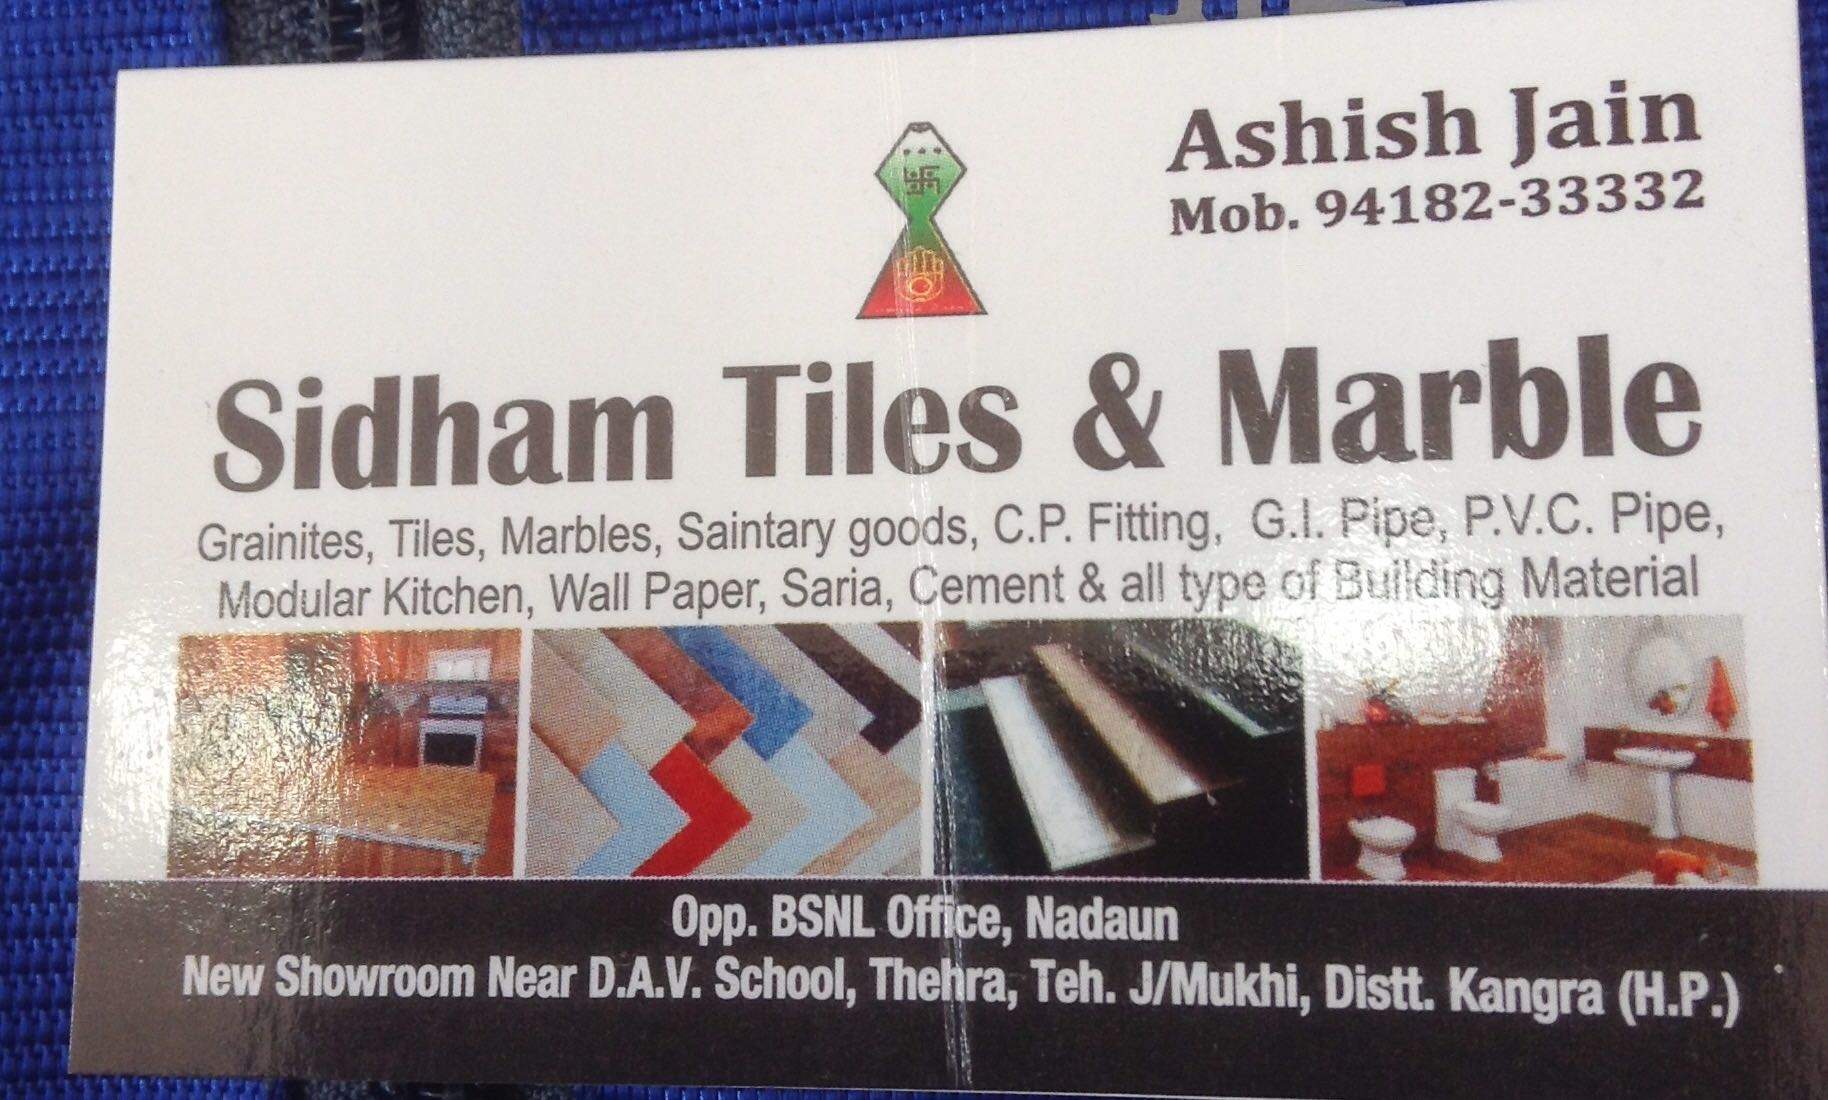 Using Marbles Starting with G Logo - Sidham TILES AND Marbles Photos, Bharoli, Kangra- Pictures & Images ...